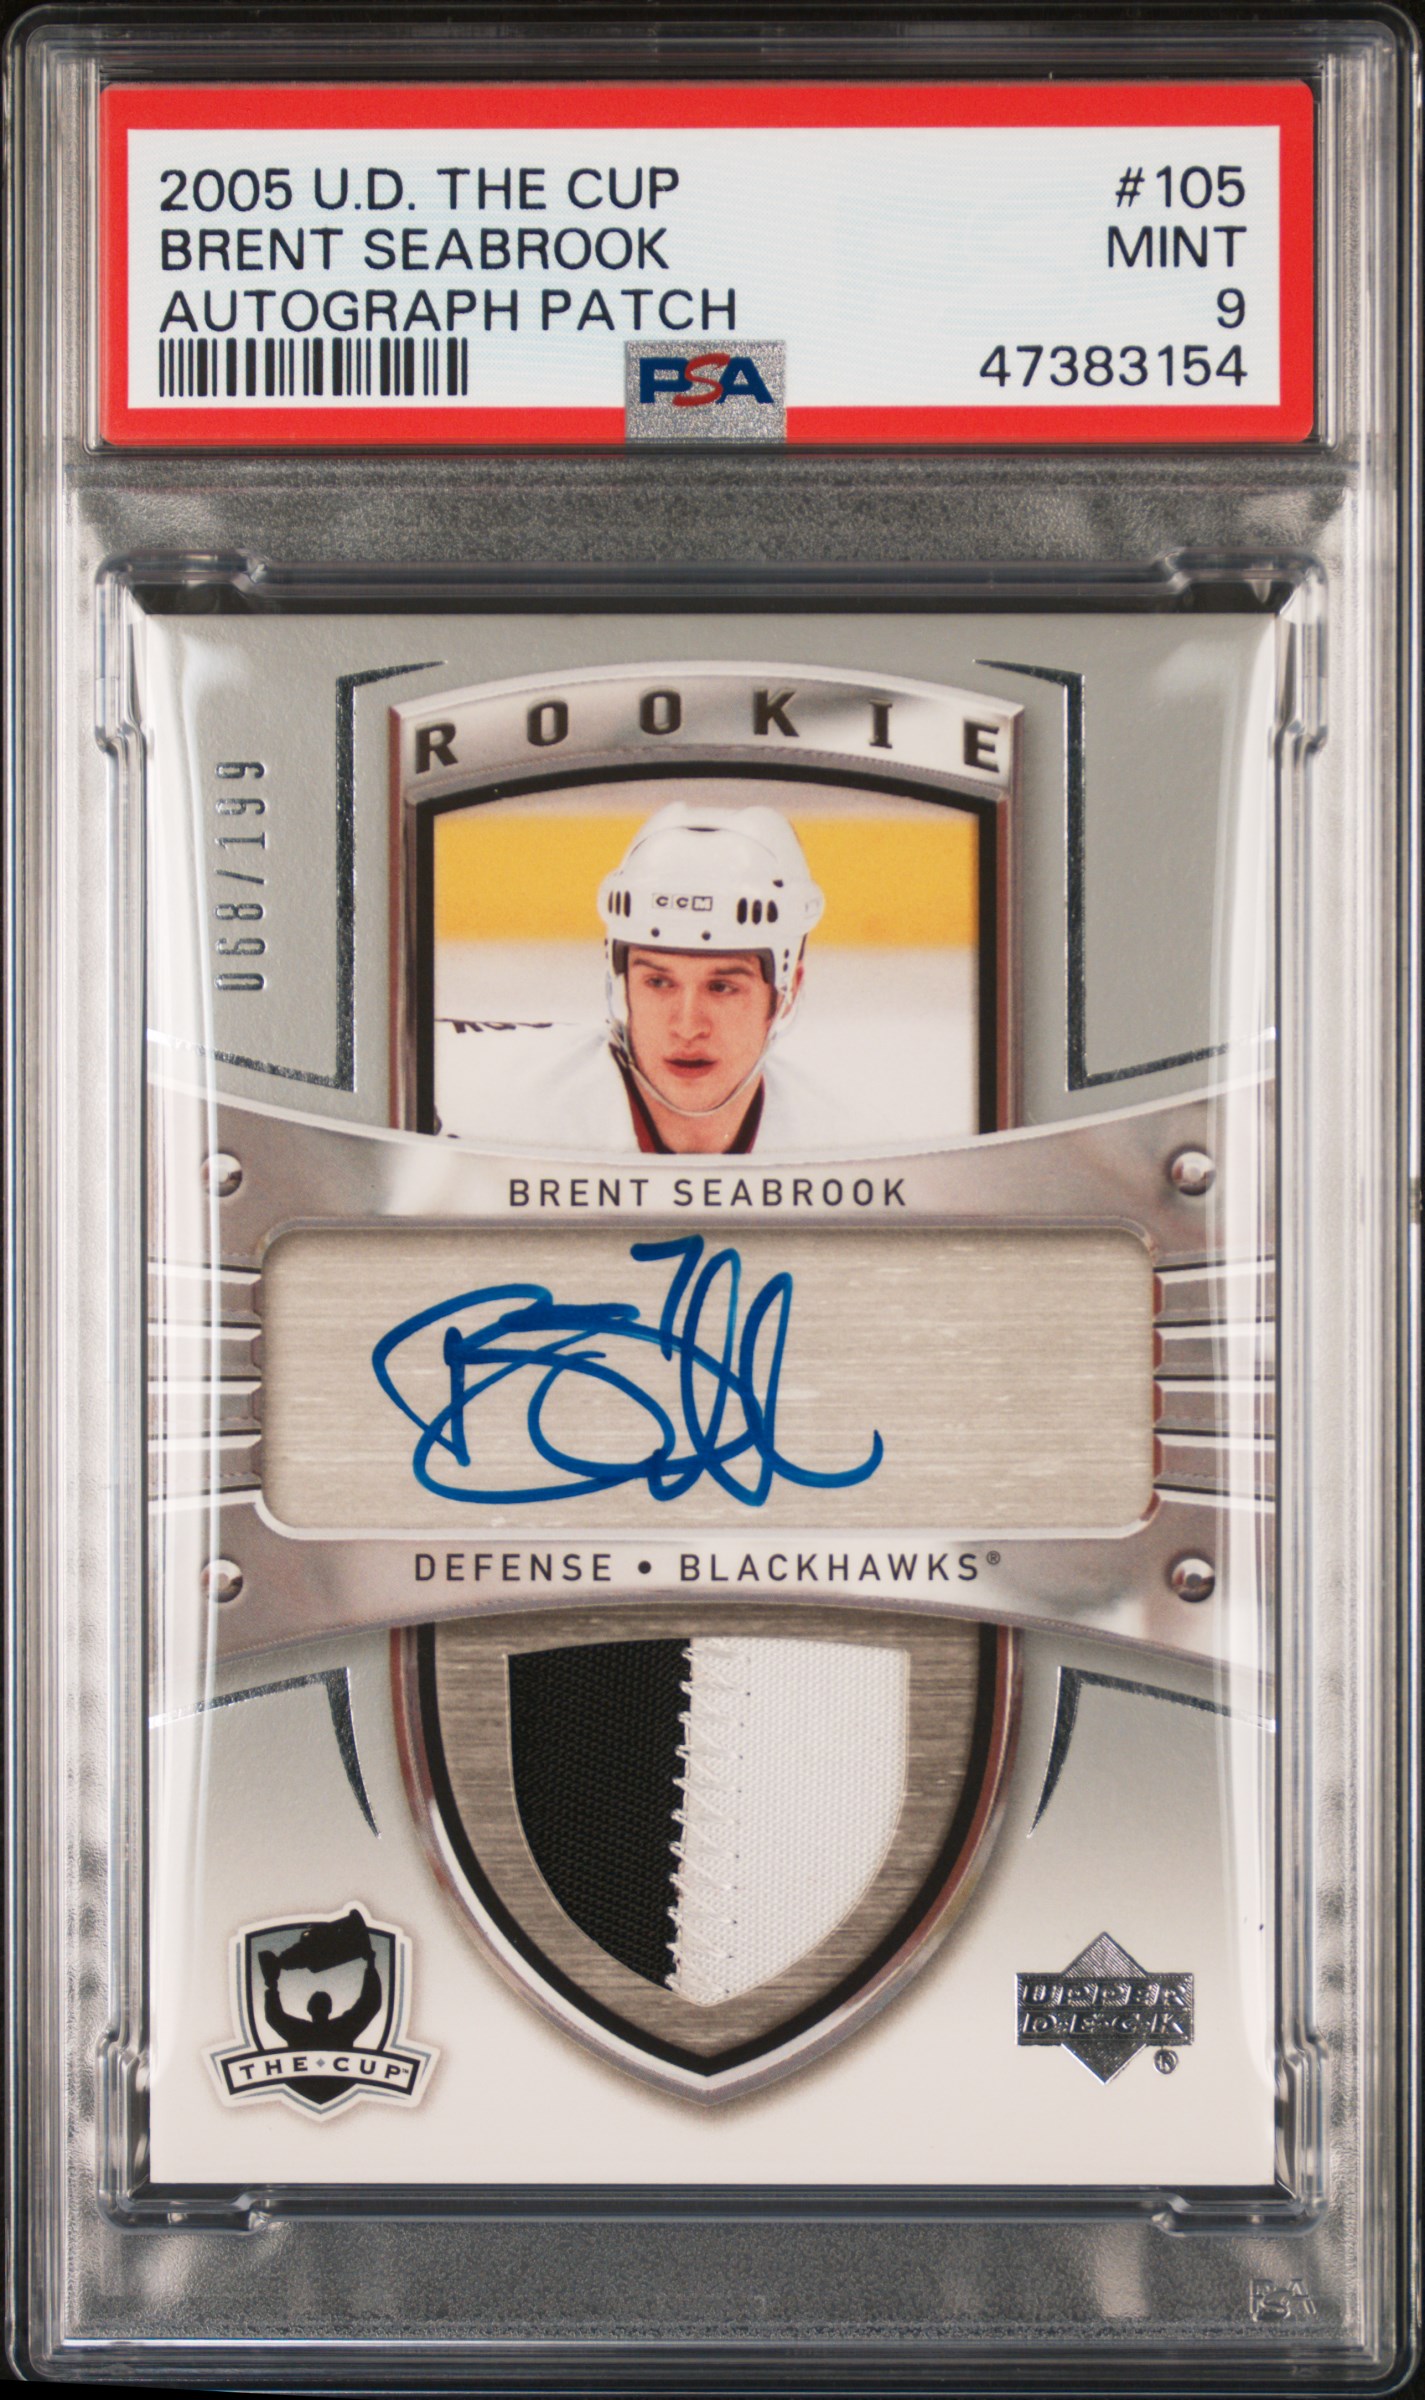 2005-06 Upper Deck The Cup Rookie Patch Autograph (RPA) #105 Brent Seabrook Signed Patch Rookie Card (#068/199) – PSA MINT 9